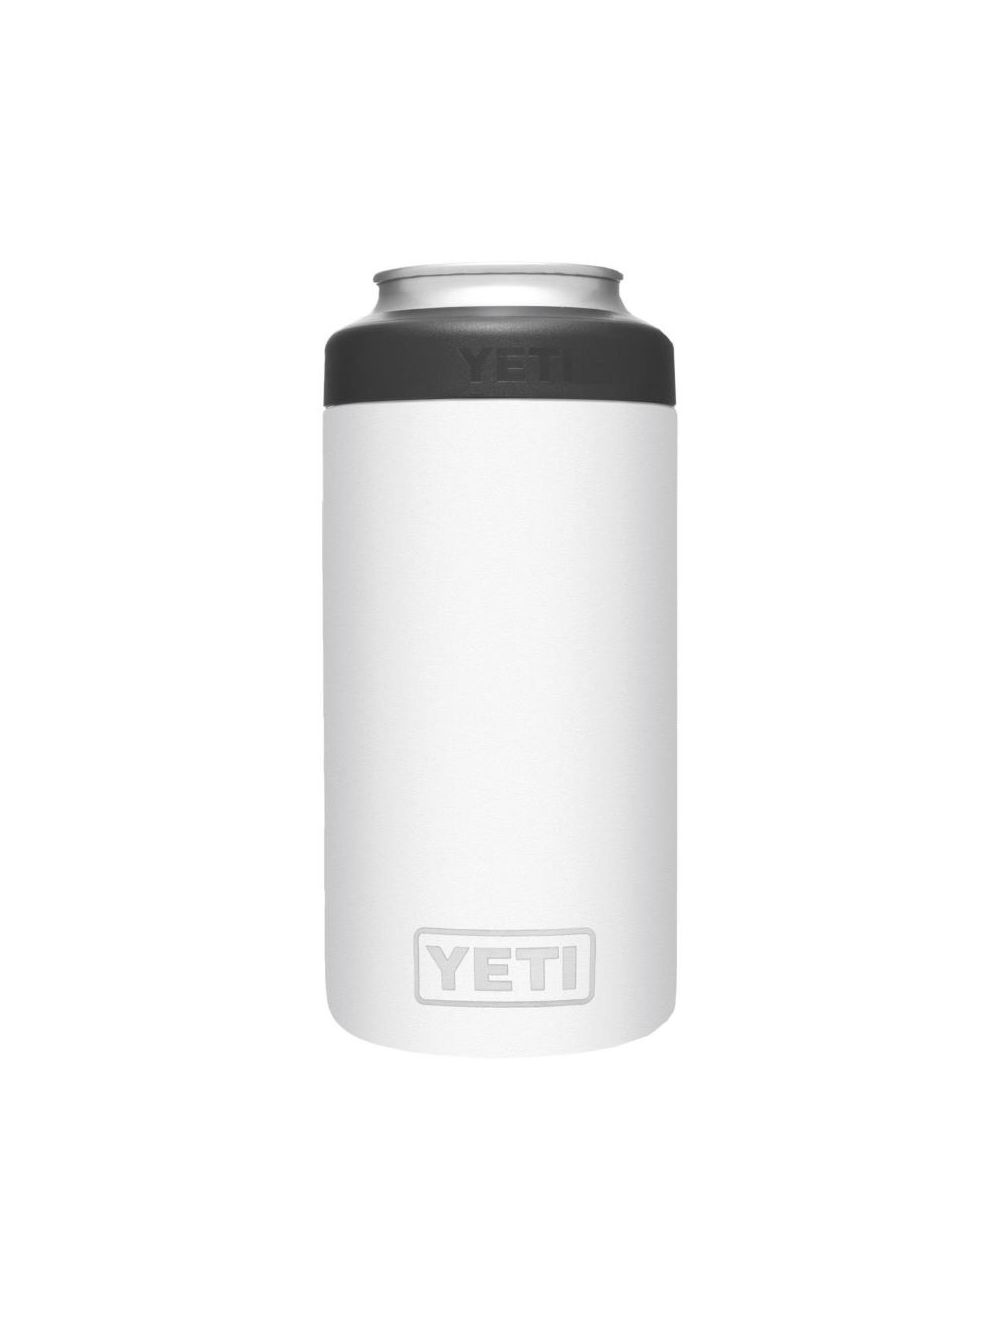 YETI Stainless Rambler 16 oz Colster Tall Can Cooler